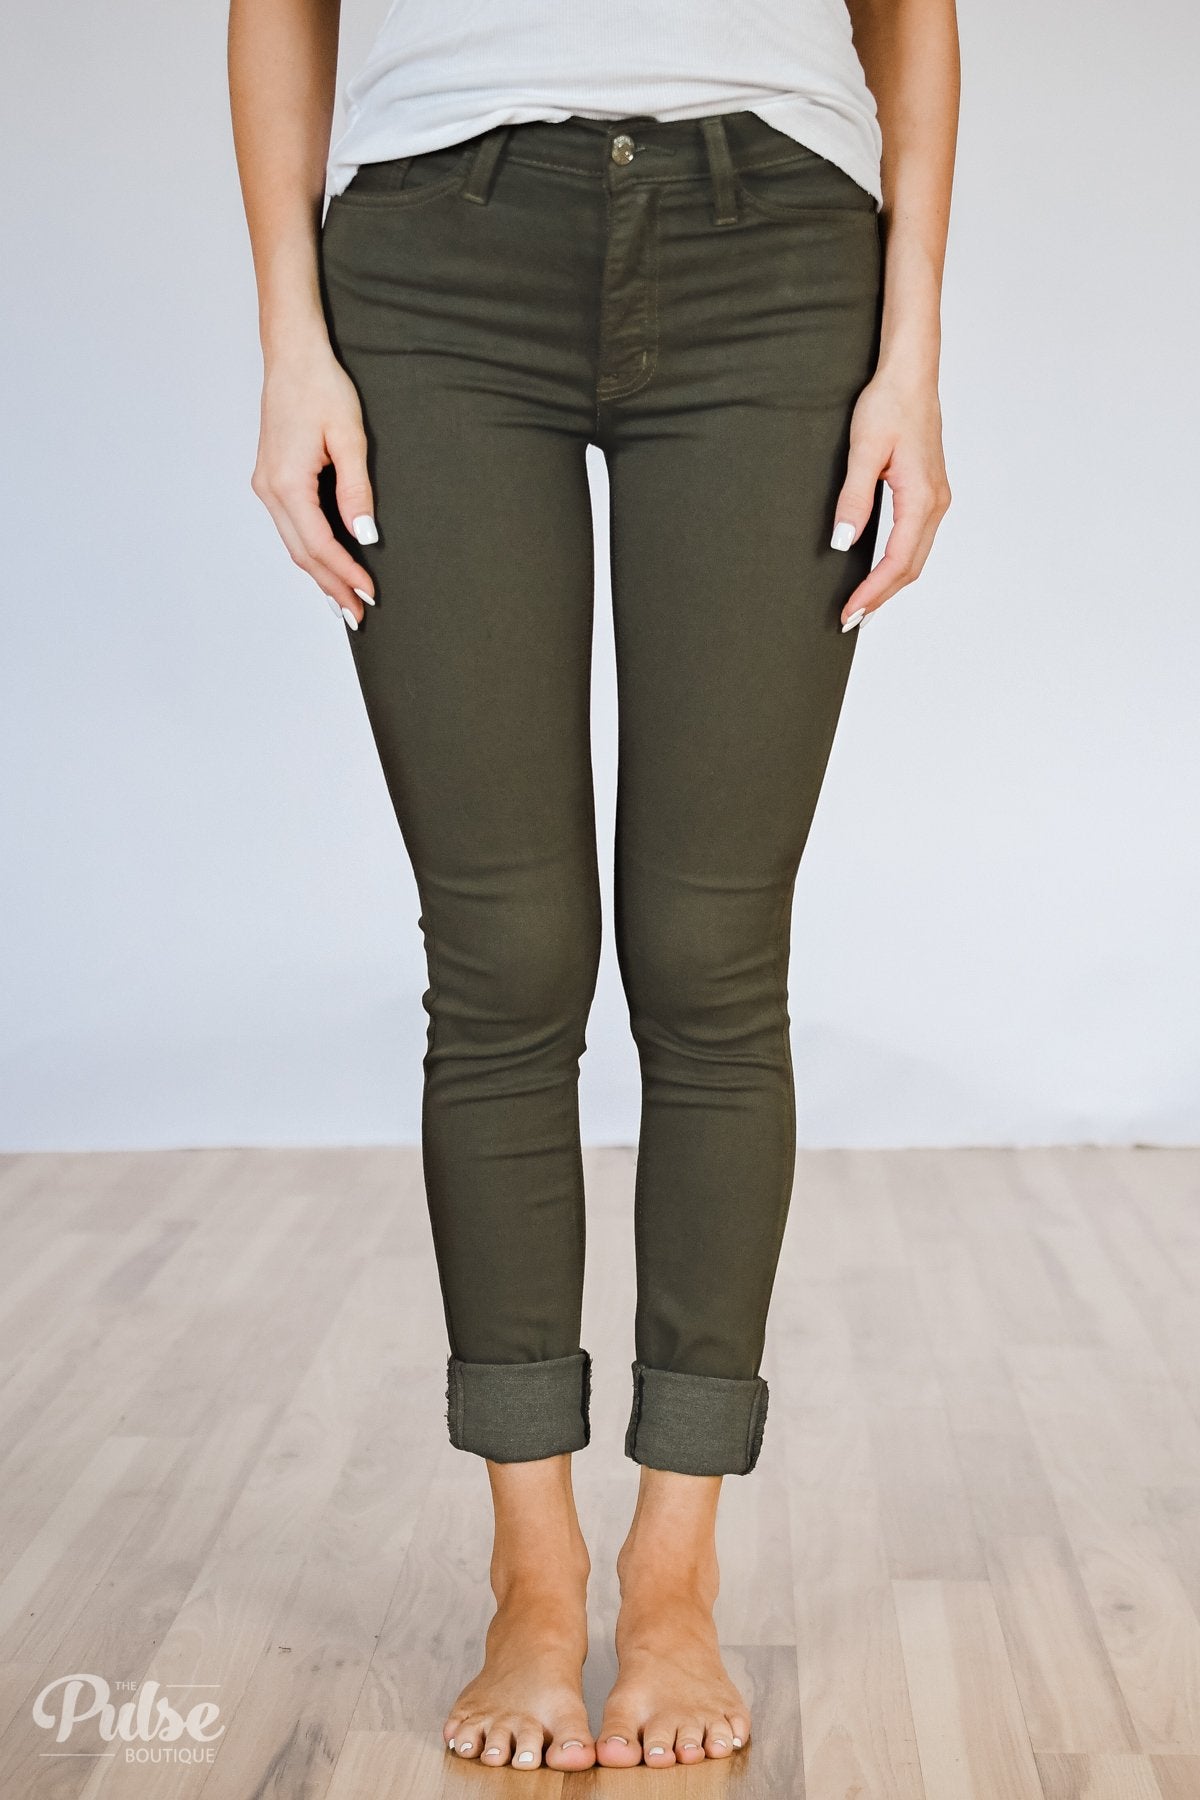 Kan Can Olive Jeans – The Pulse Boutique